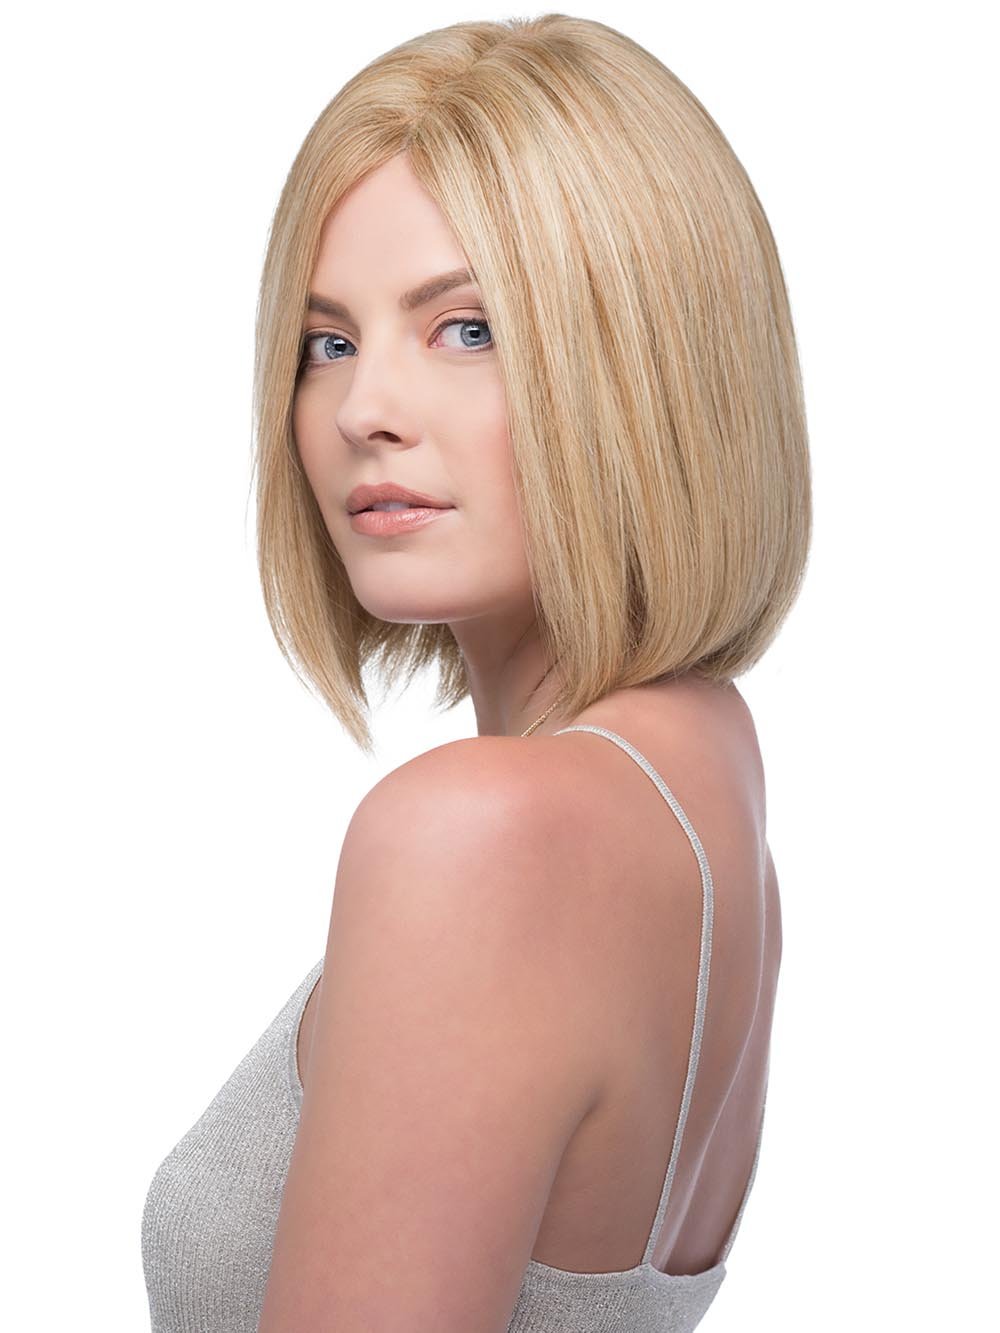 Is a classic bob style that also features a monofilament top and hand-tied back